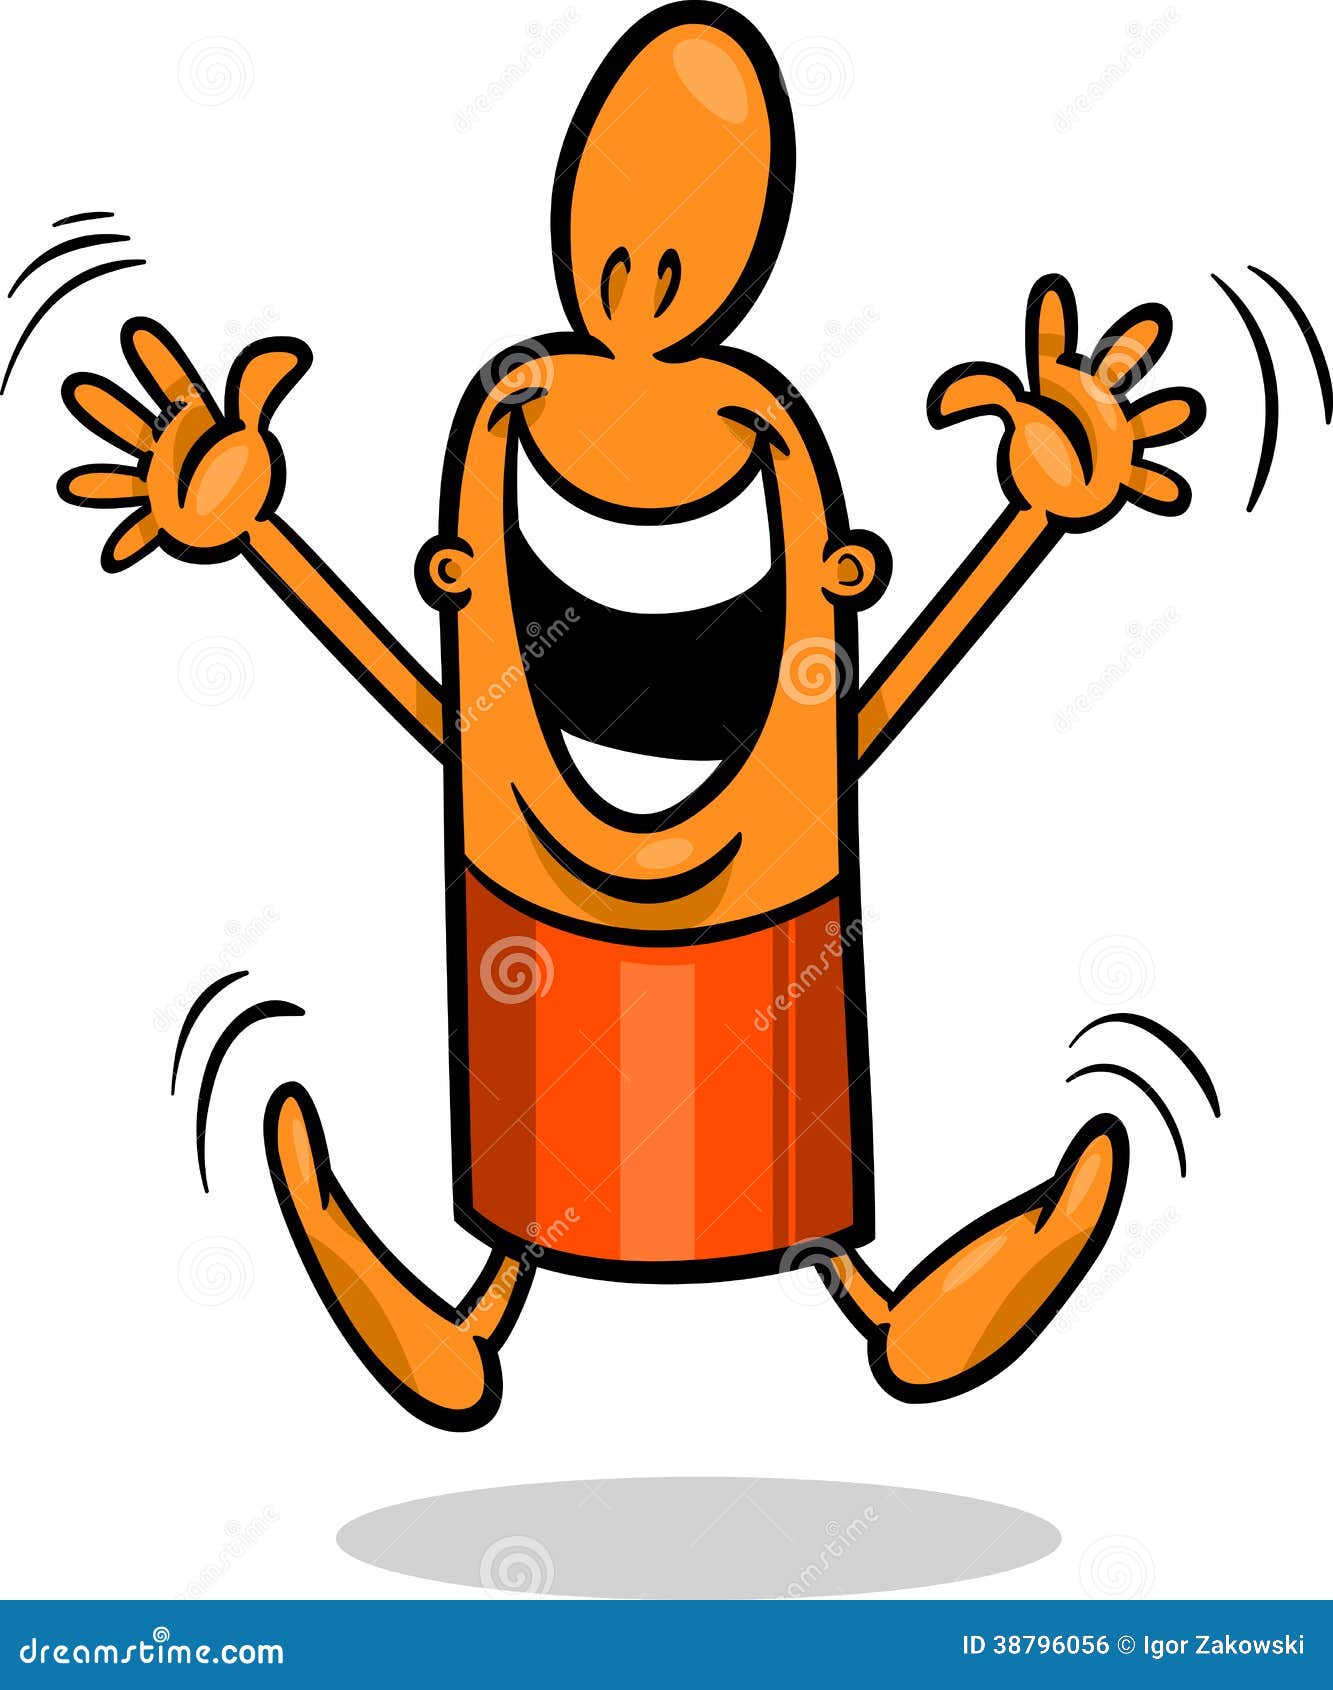 excited-guy-cartoon-illustration-happy-funny-character-38796056.jpg